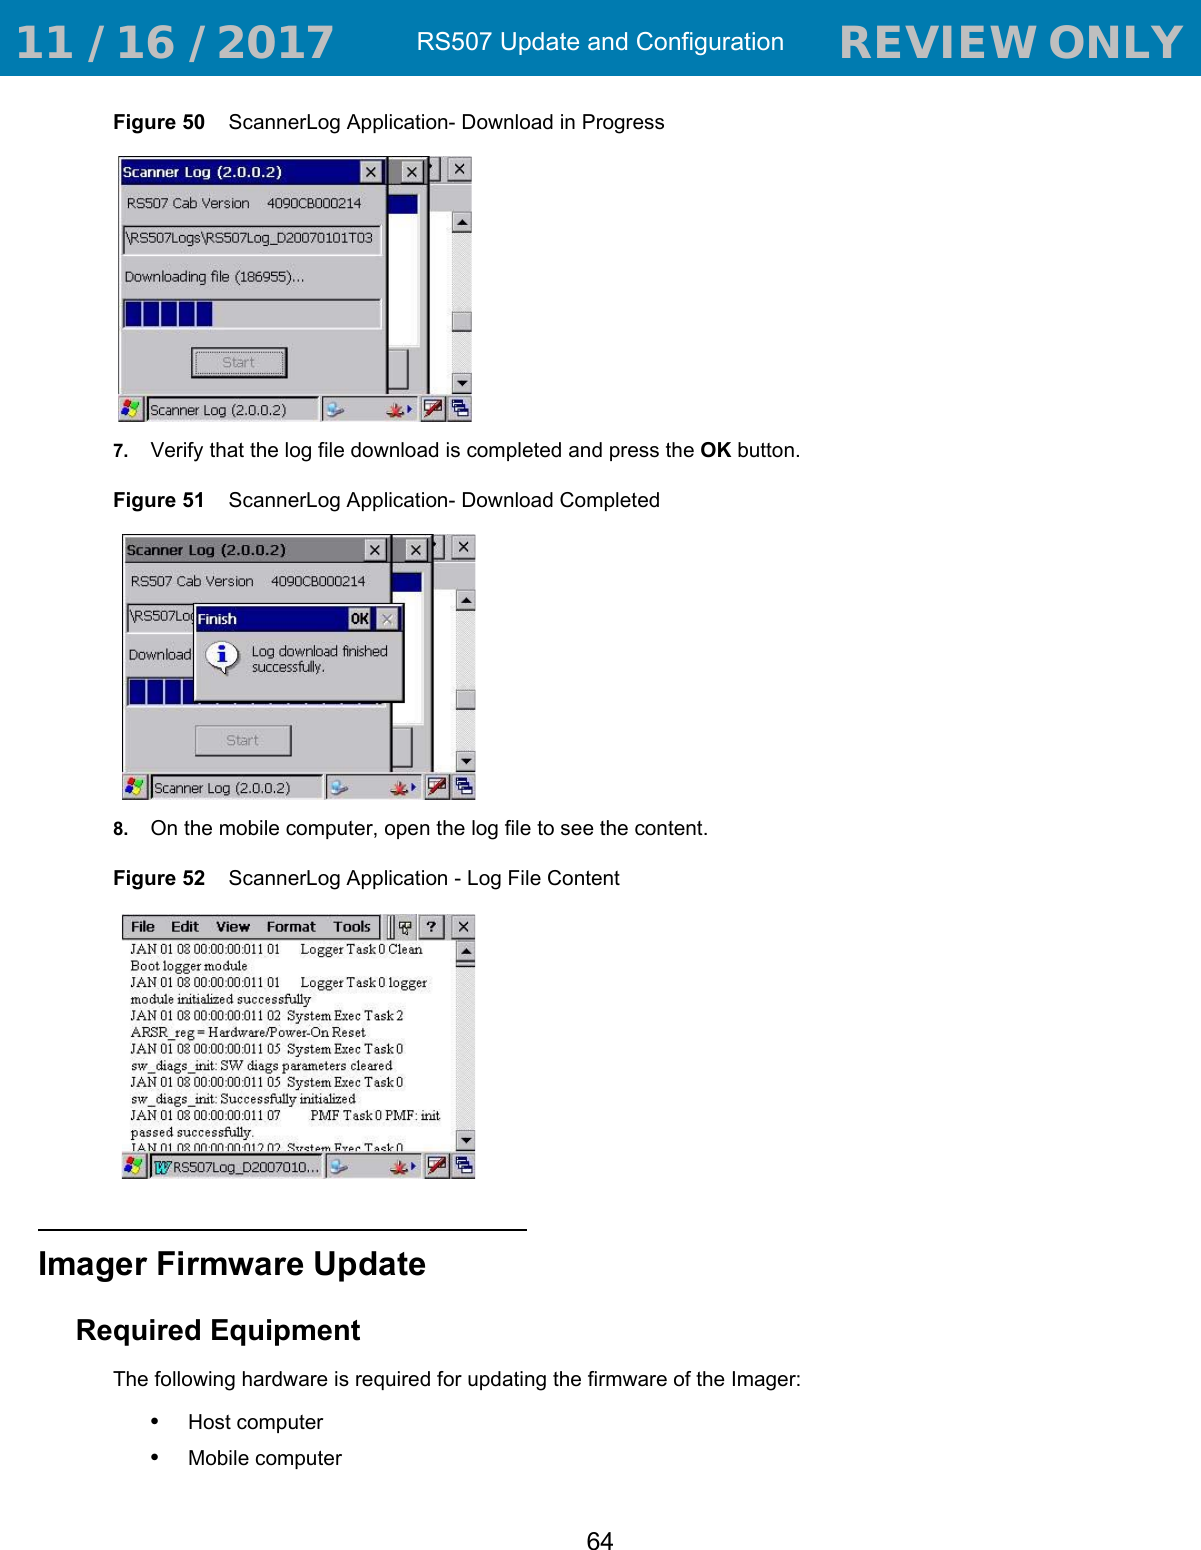 RS507 Update and Configuration63Figure 47    Dialog Screen - Bluetooth SSI Scanner Driver4. Define the name and download location of the log file and press the OK button.Figure 48    ScannerLog Application - Log File Name and Download Location5. Press Start to begin downloading.Figure 49    ScannerLog Application- Starting Download6. Verify that downloading of the log file starts. 11 / 16 / 2017                                  REVIEW ONLY                             REVIEW ONLY - REVIEW ONLY - REVIEW ONLY